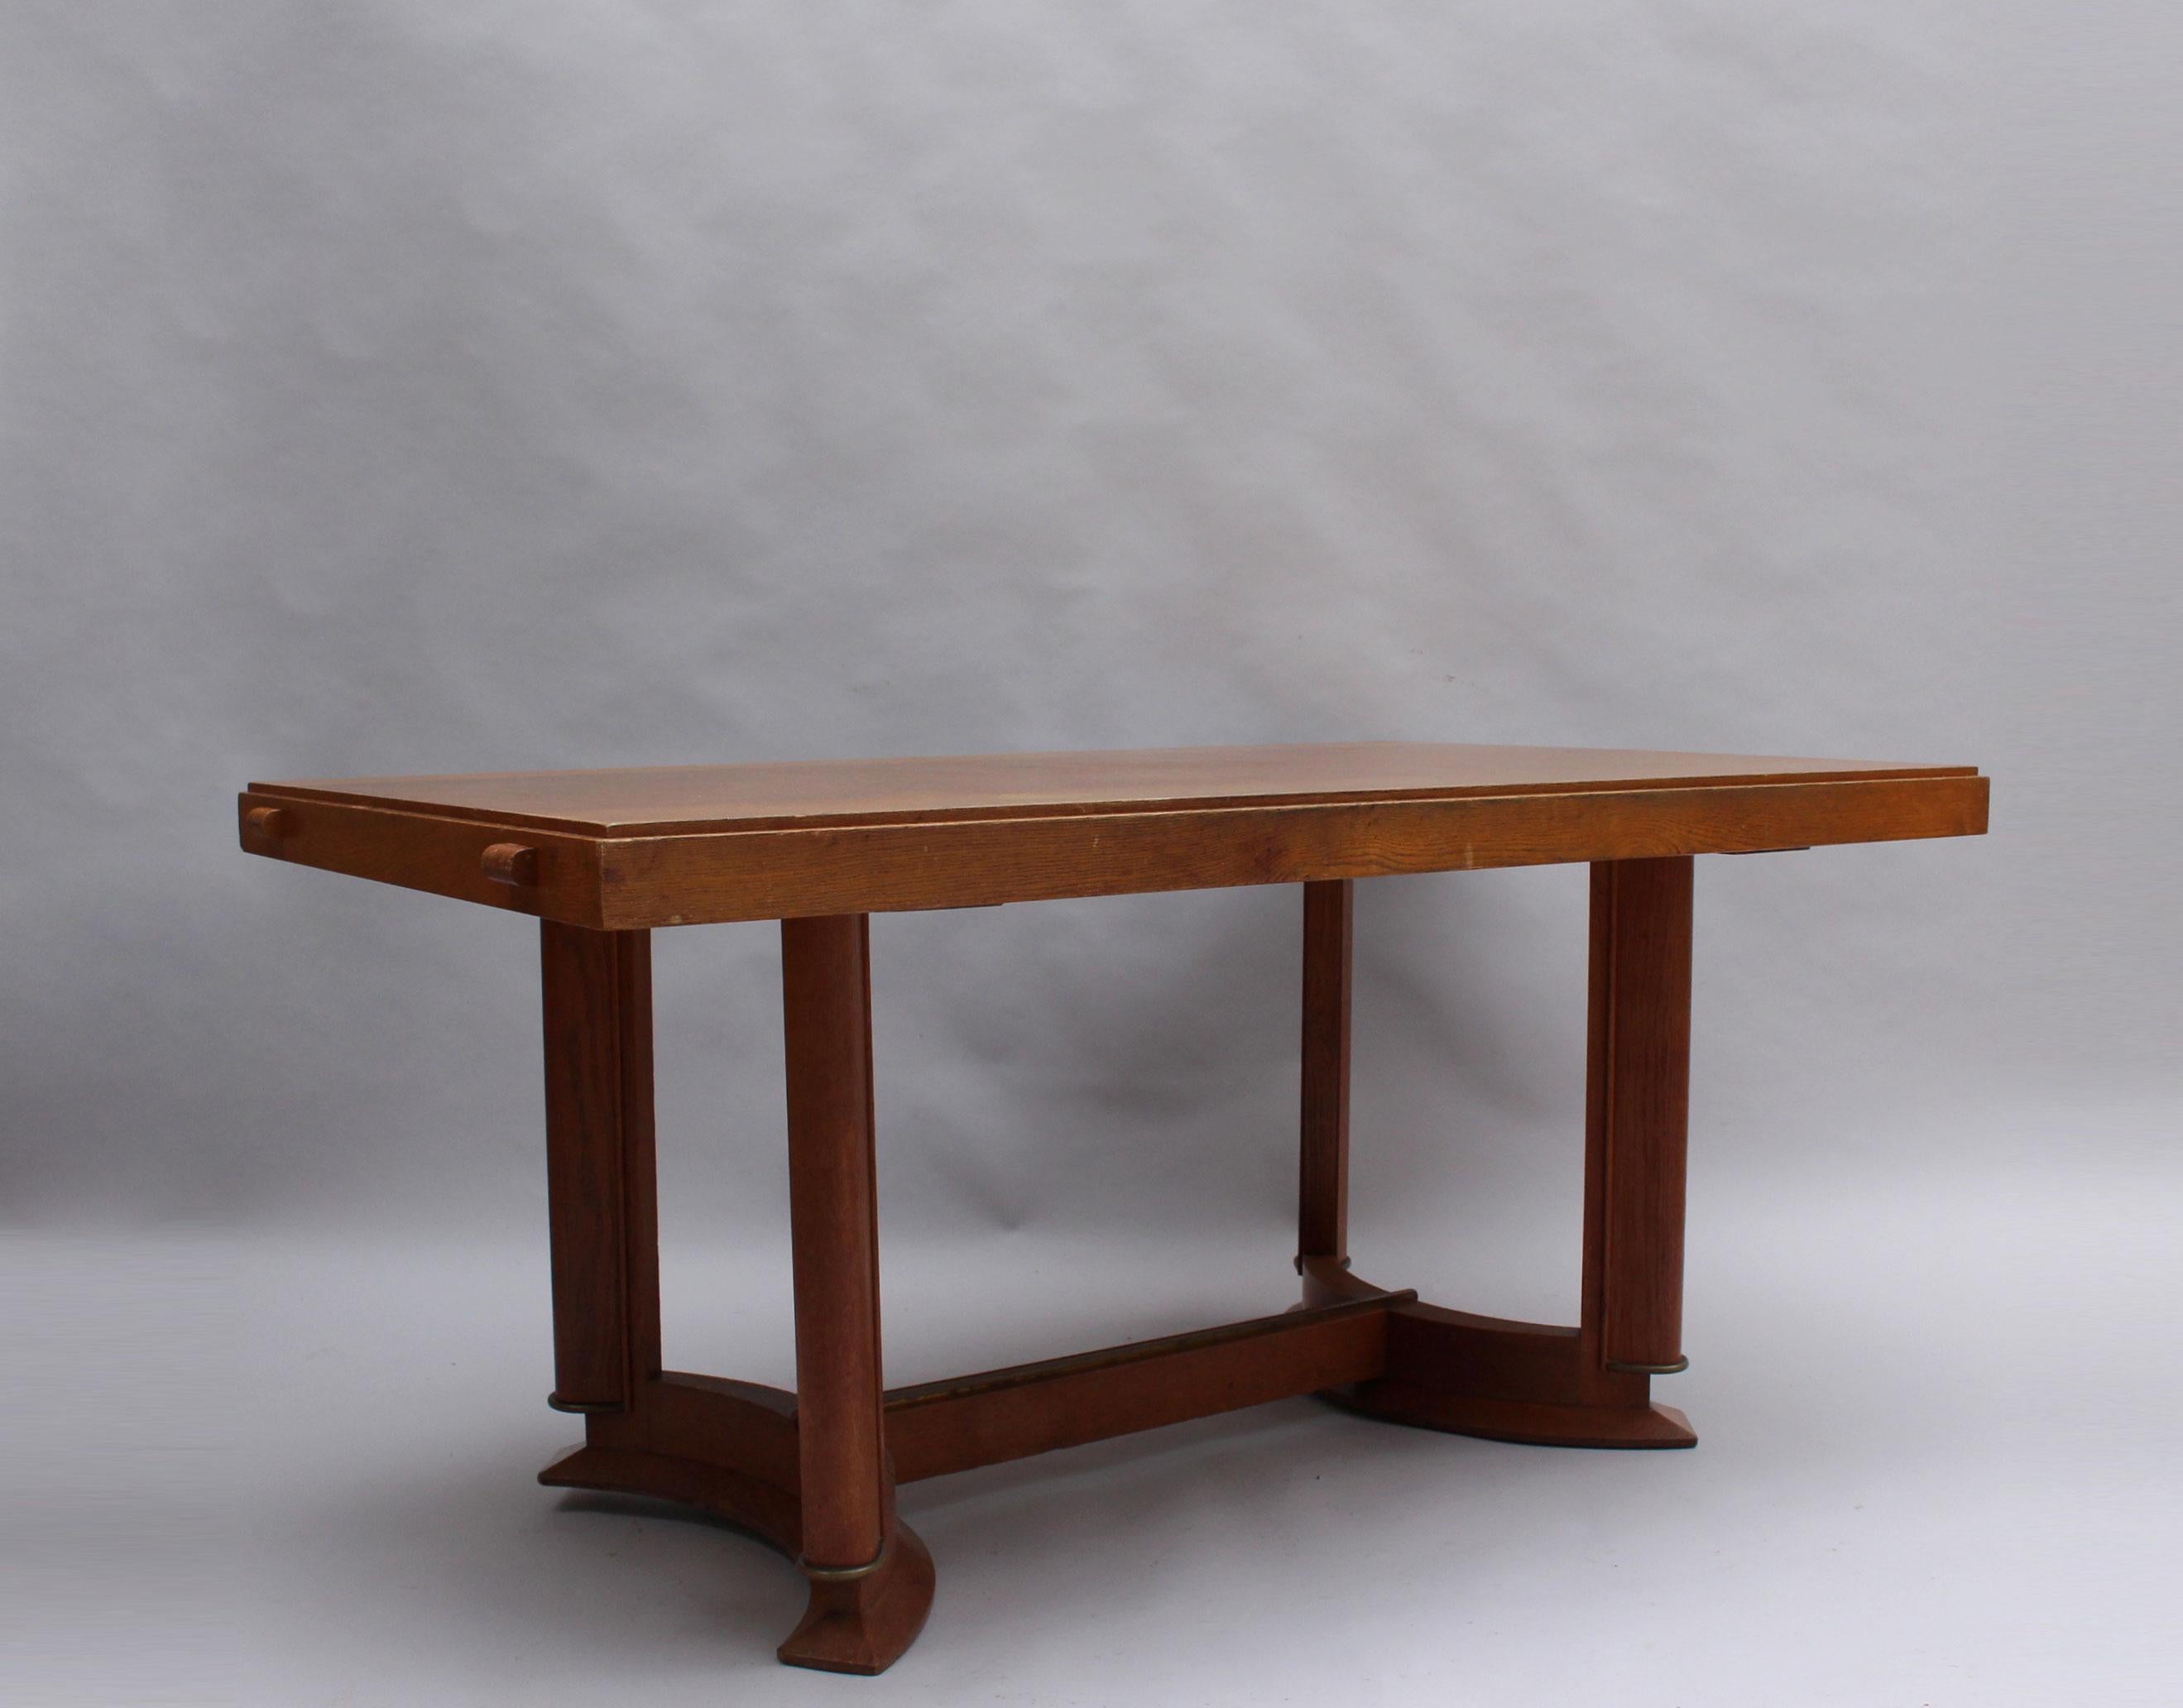 Rectangular top is supported by four legs with brass details and a dual arc-shaped base.
           